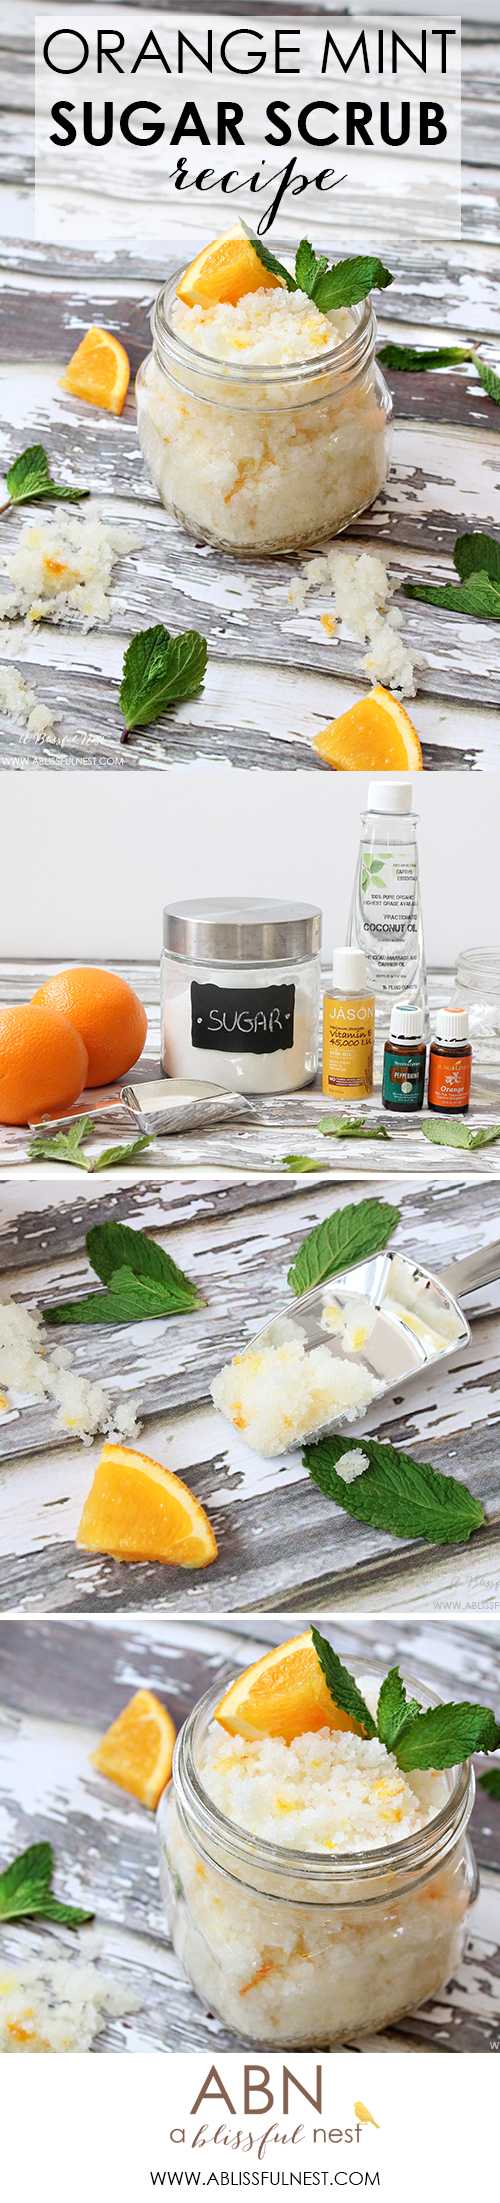 A simple recipe to make orange mint sugar scrub. Leaves your skin smooth and soft while exfoliating. 